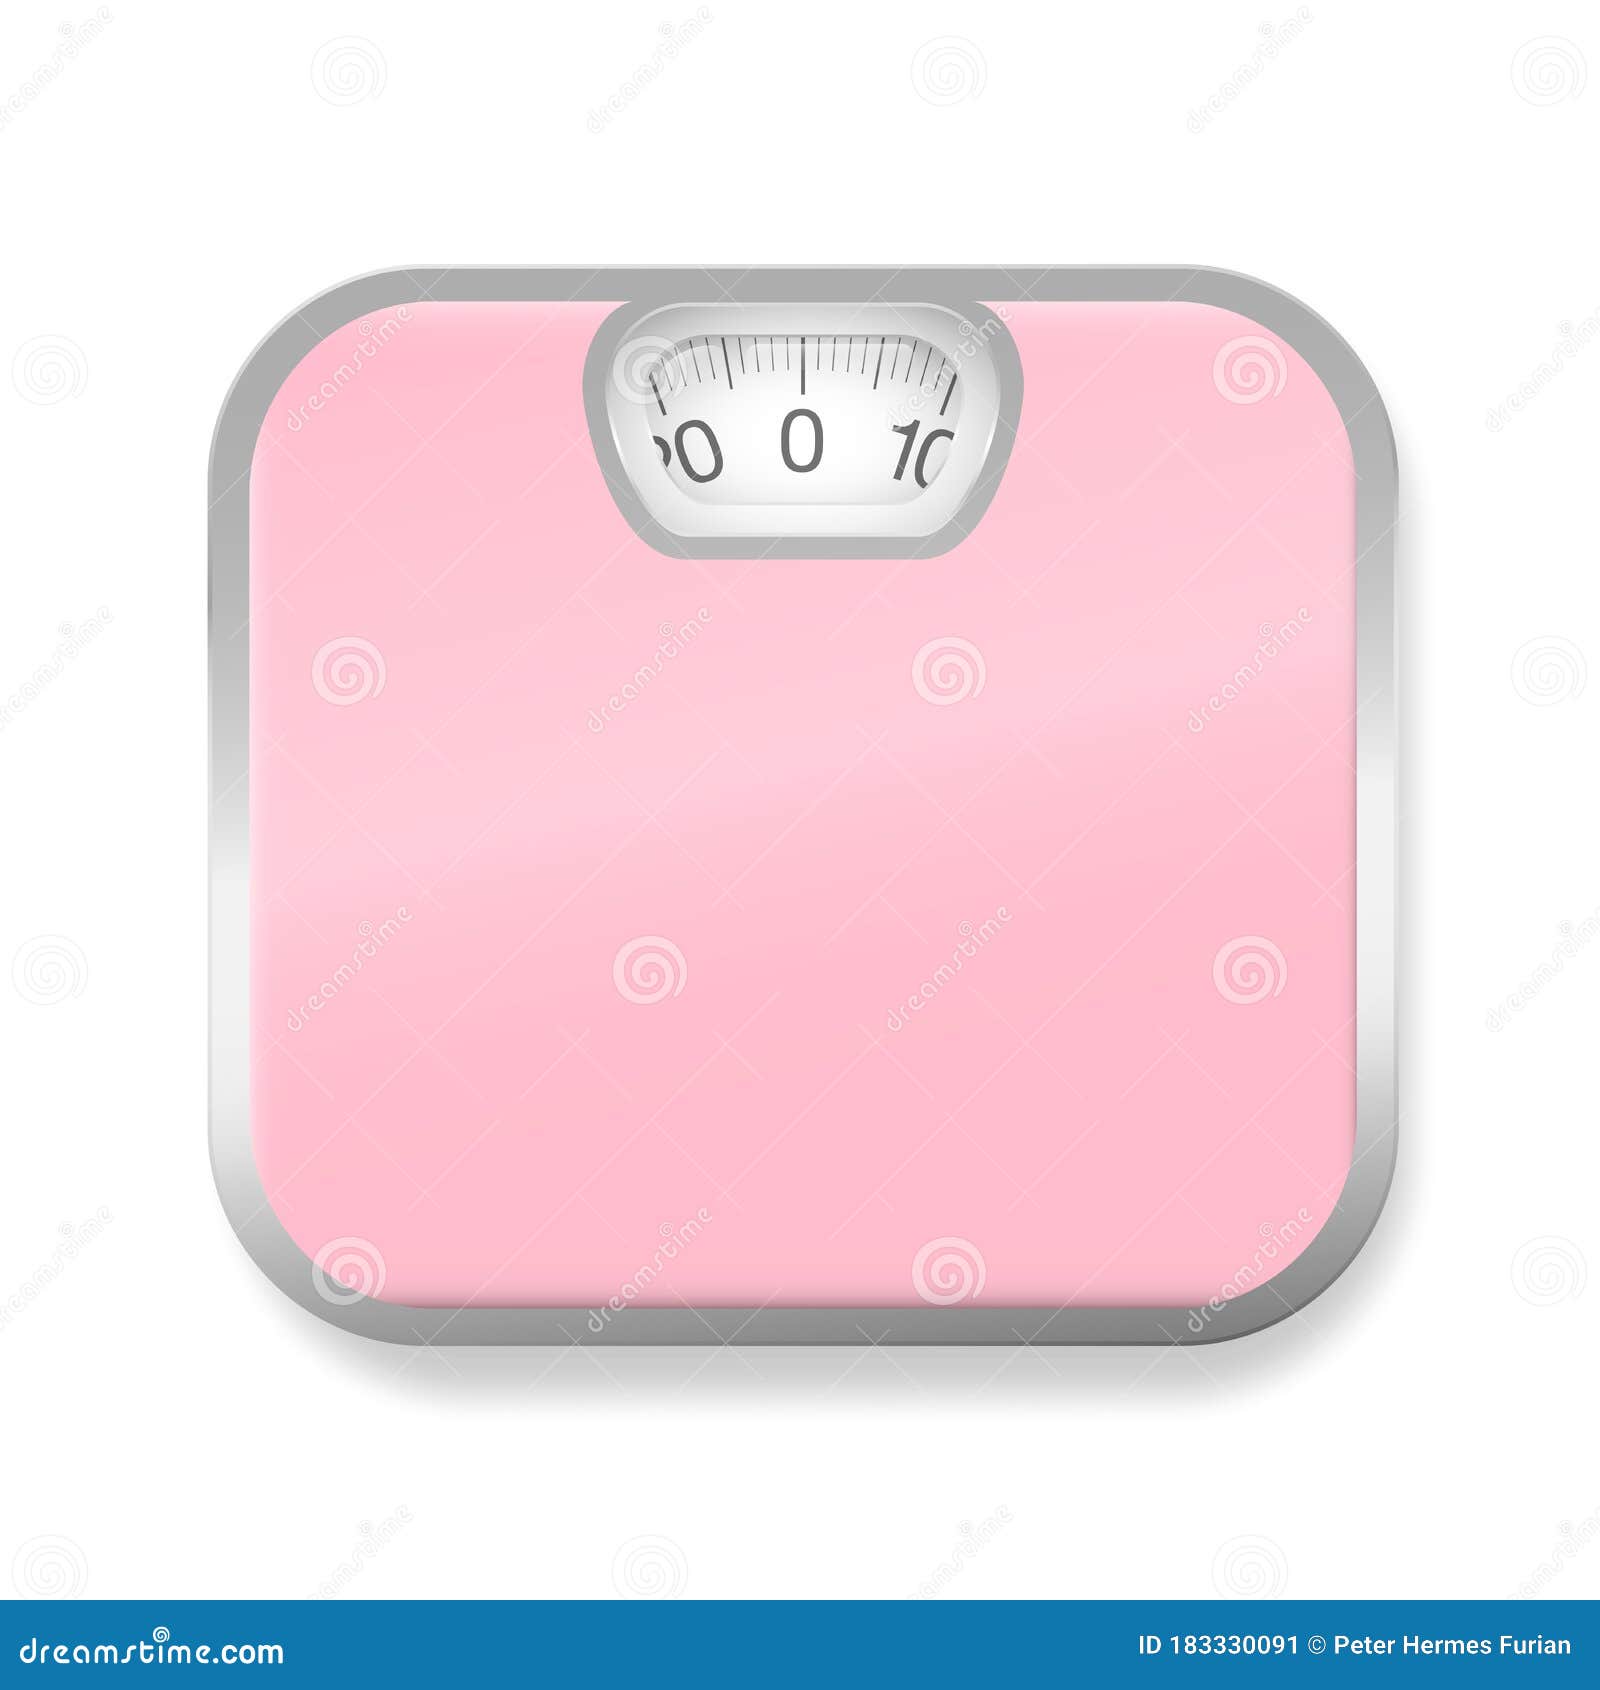 Pink Weight Scale Clip Art at  - vector clip art online